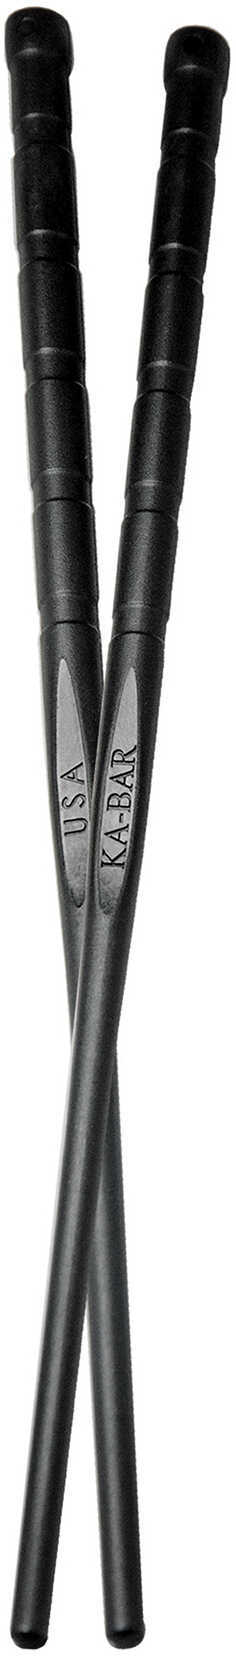 KABAR Chopsticks Black 9.5" Grilamid Are Sold As Four Pack Providing Two Sets Of American-Made Dishwasher